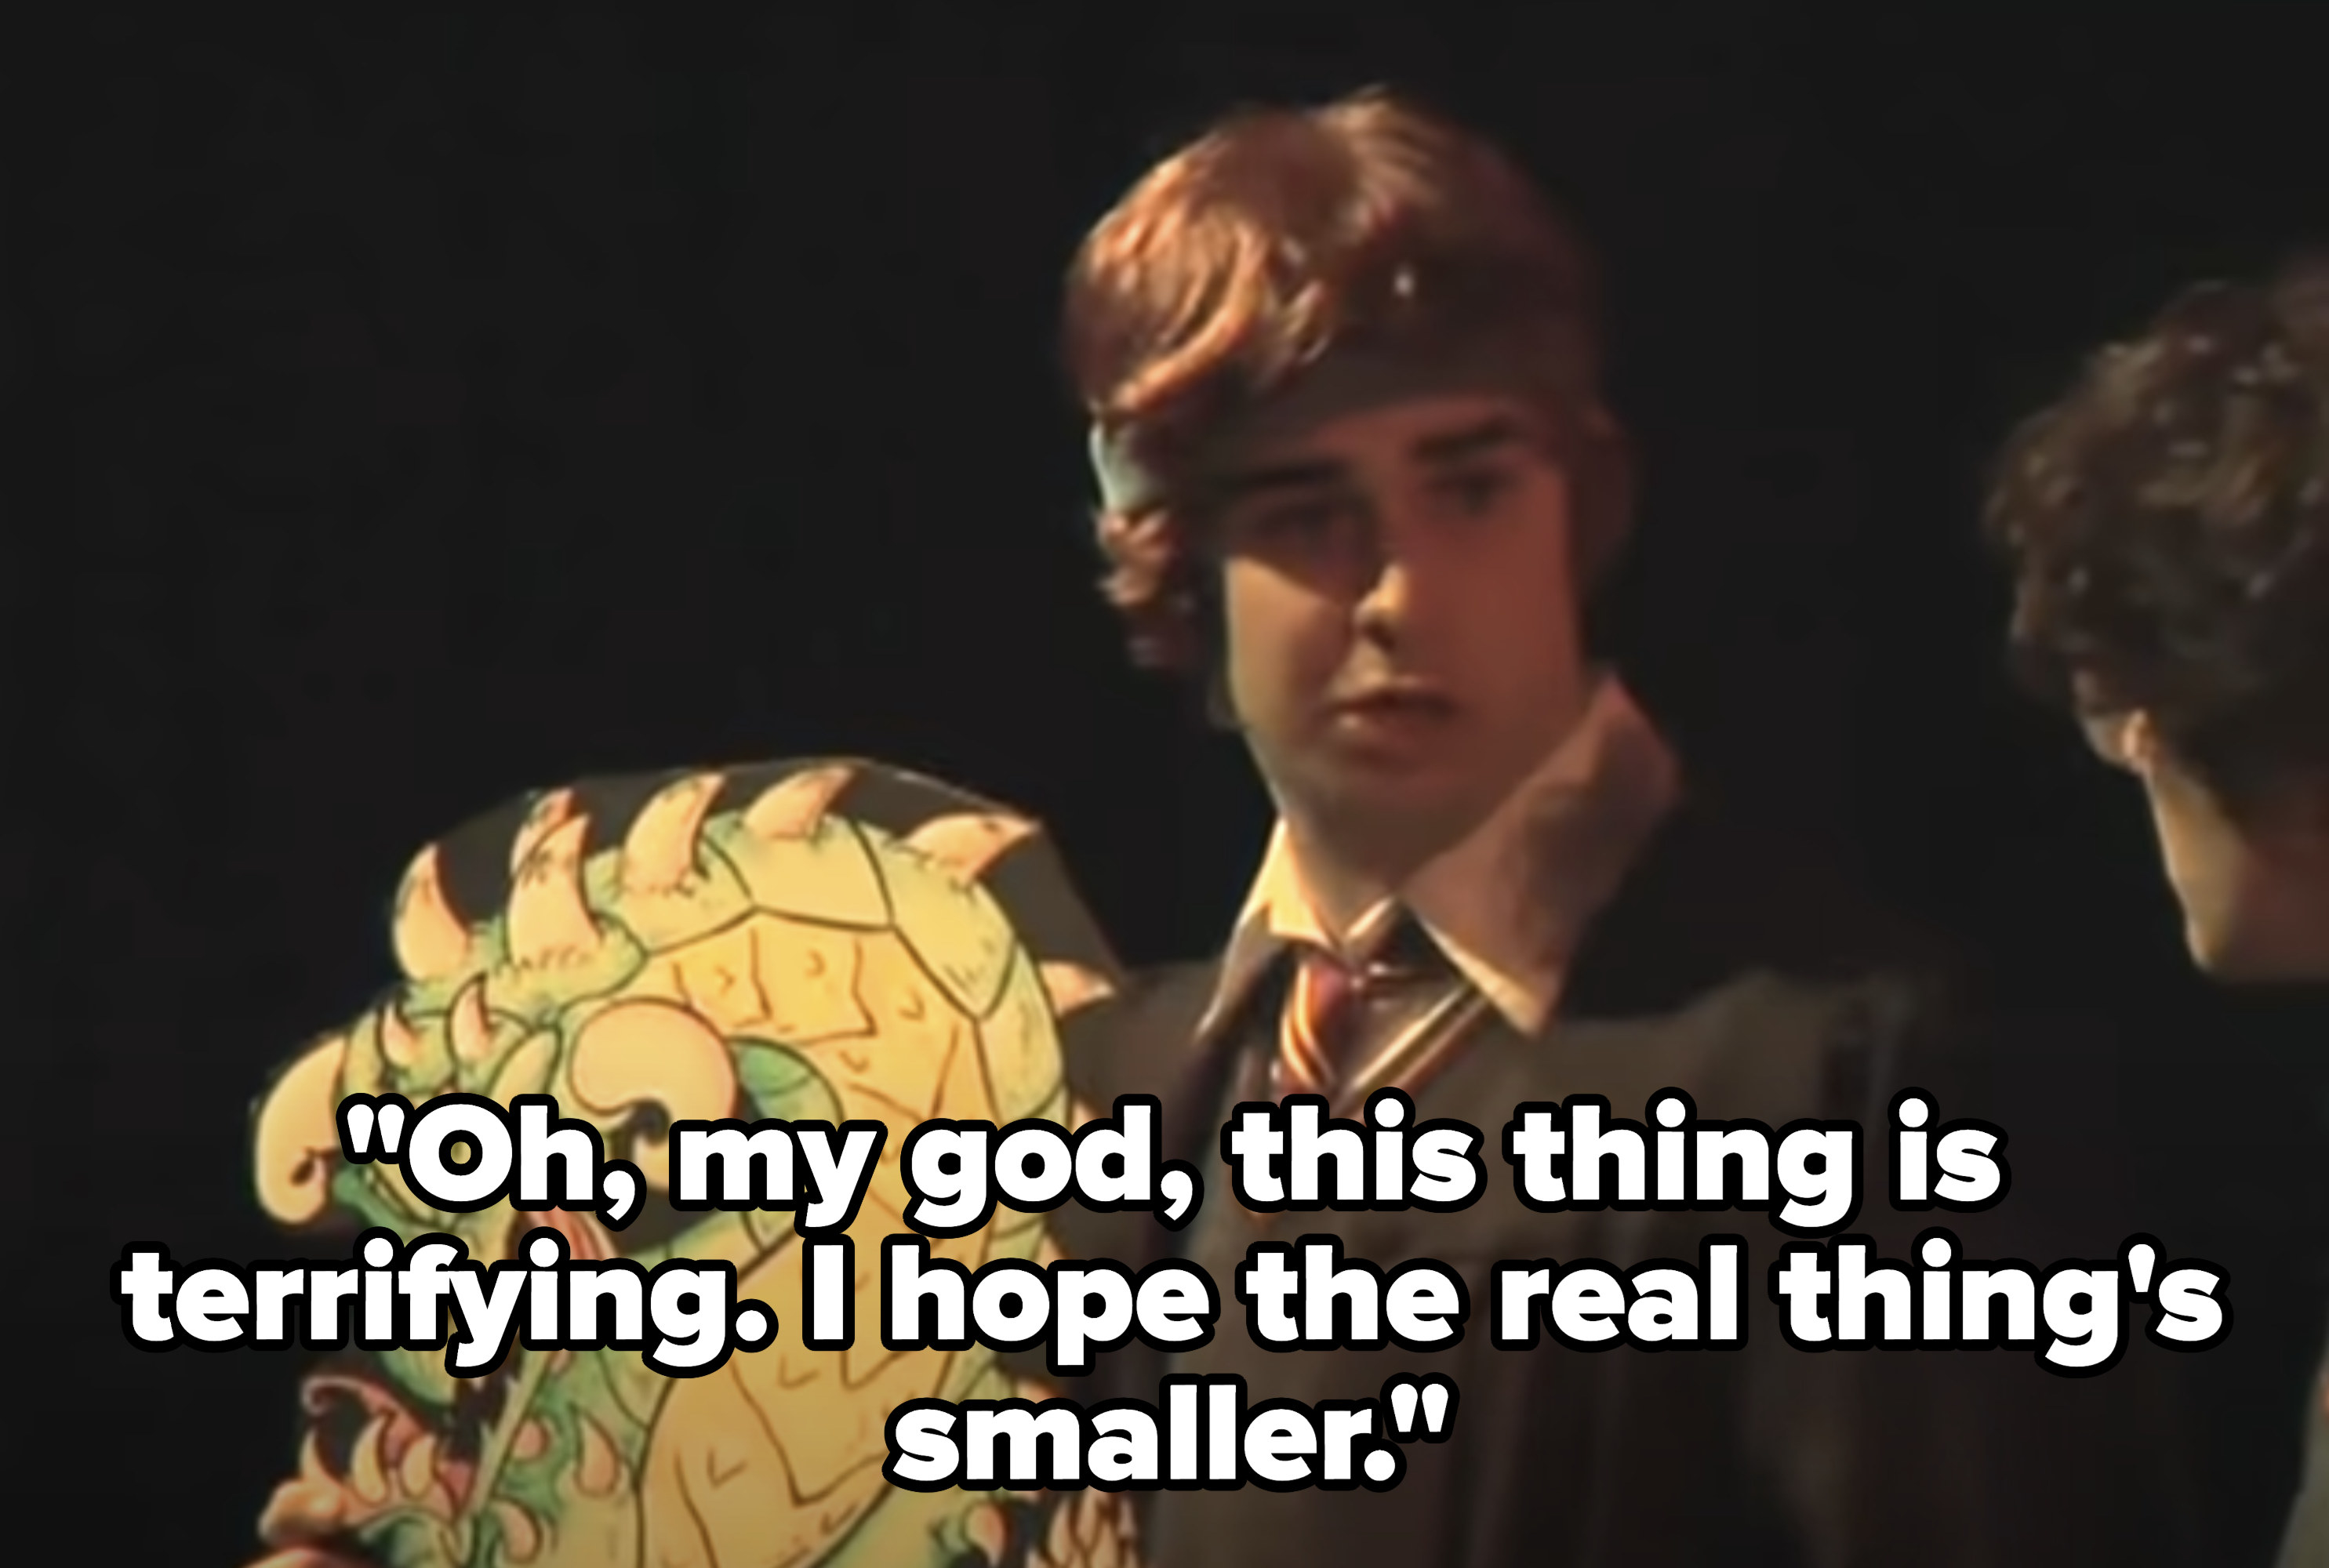 Ron: &quot;Oh, my god, this thing is terrifying. I hope the real thing&#x27;s smaller&quot;